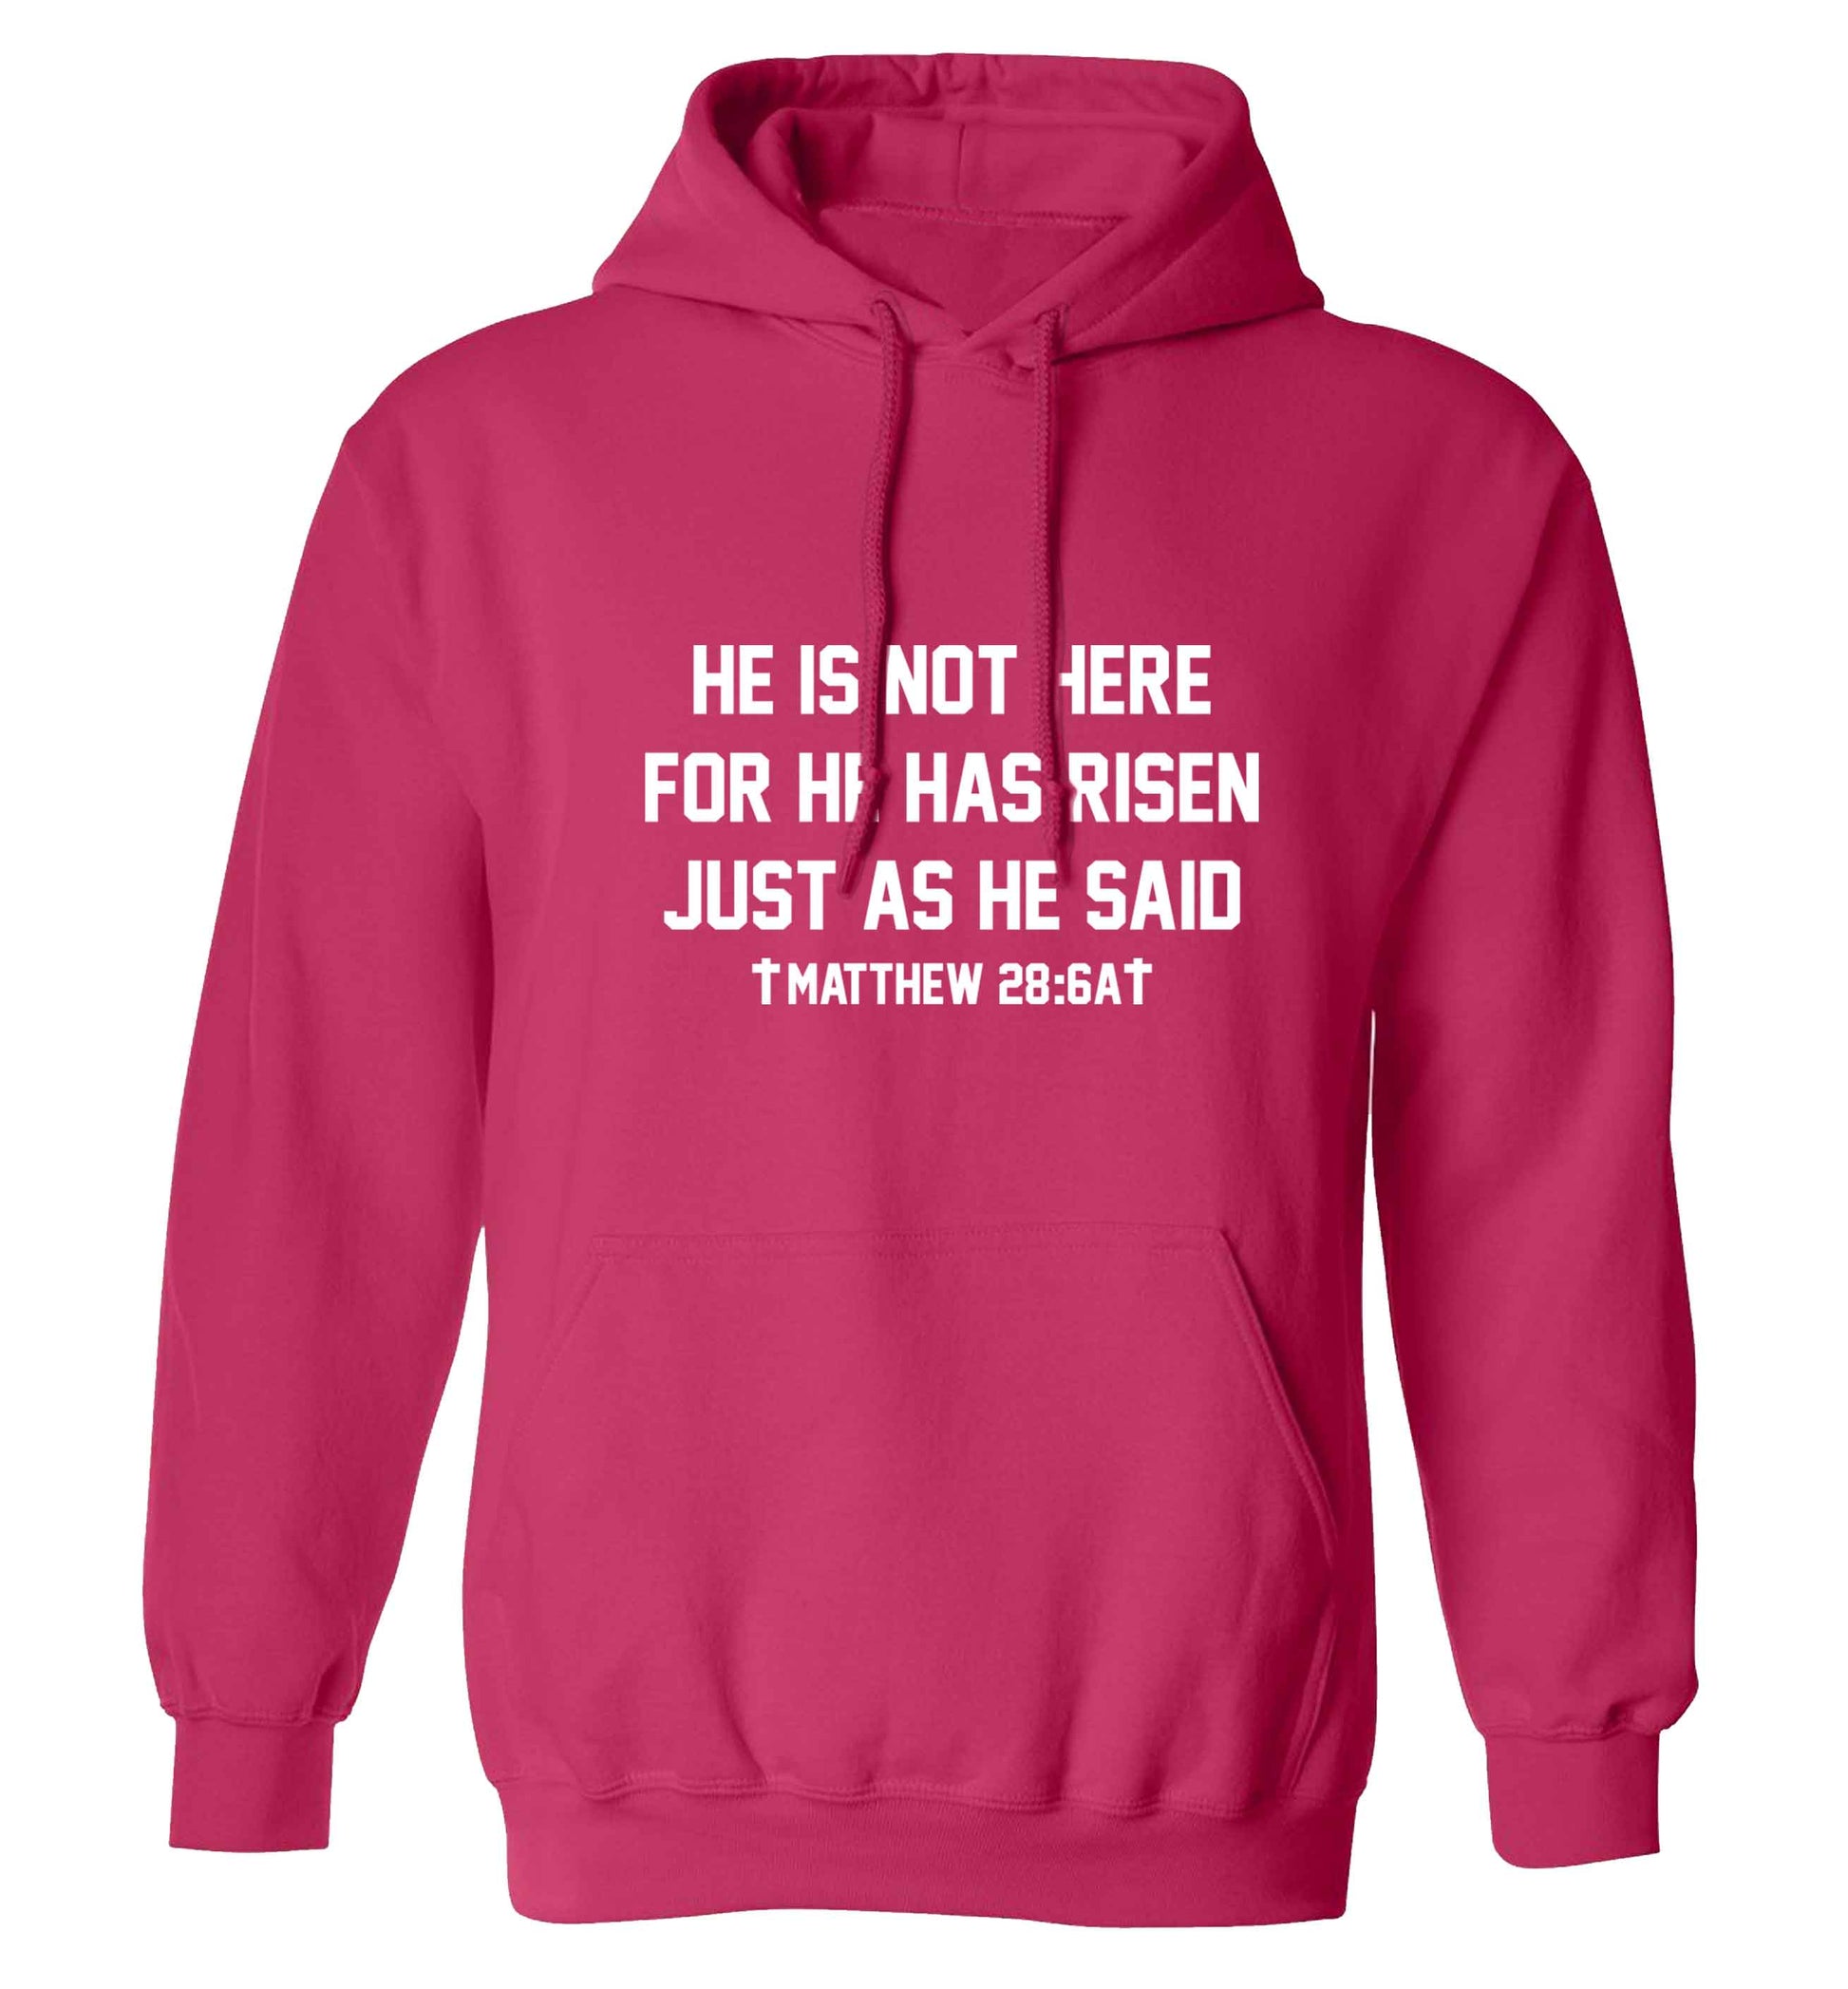 He is not here for he has risen just as he said matthew 28:6A adults unisex pink hoodie 2XL